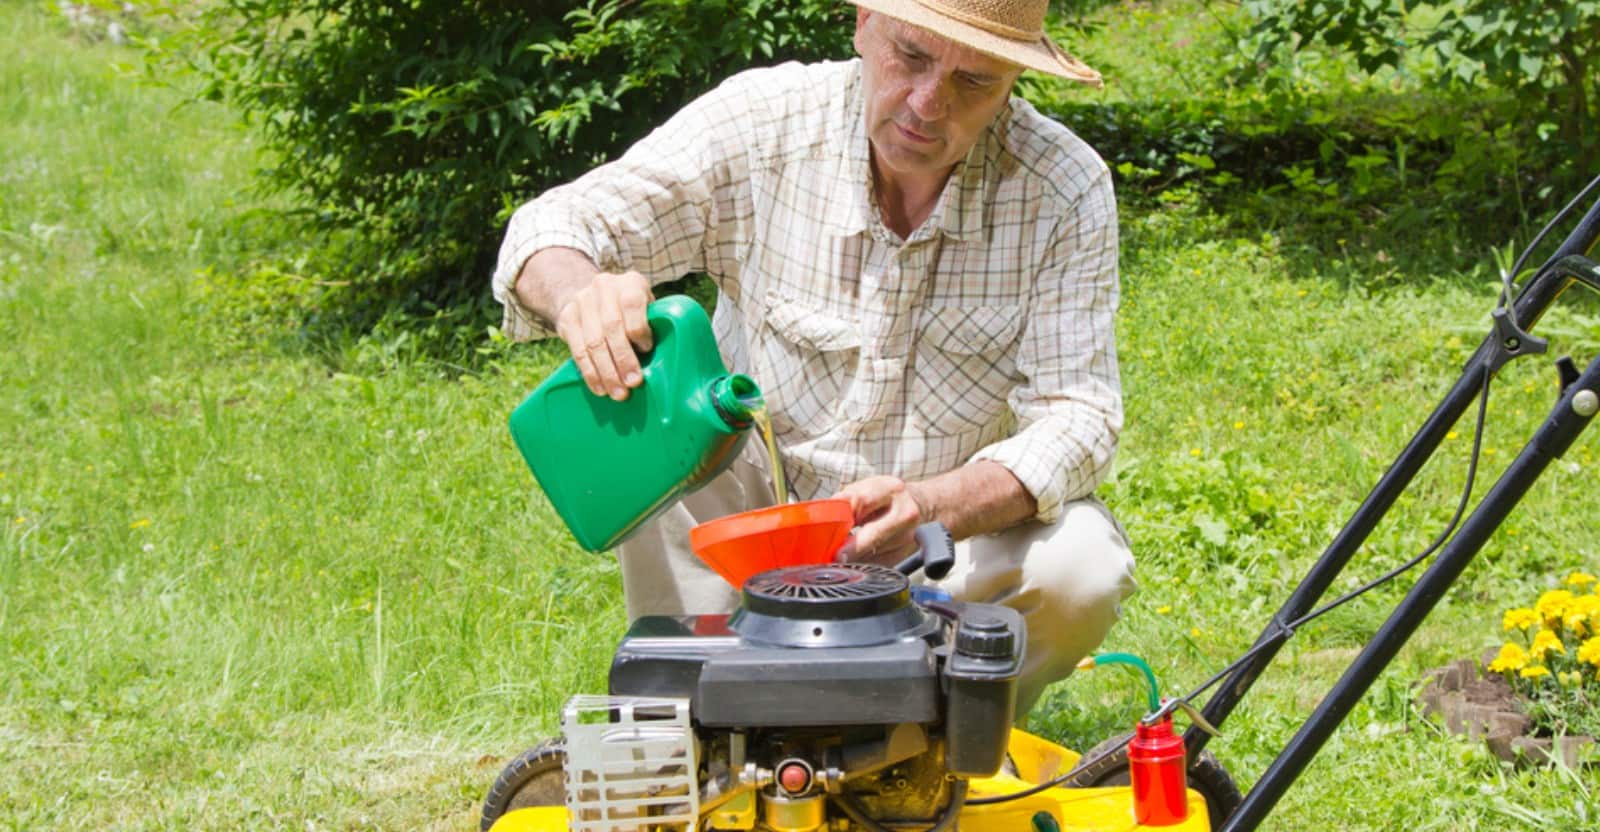 How Much Oil Does a Lawnmower Take